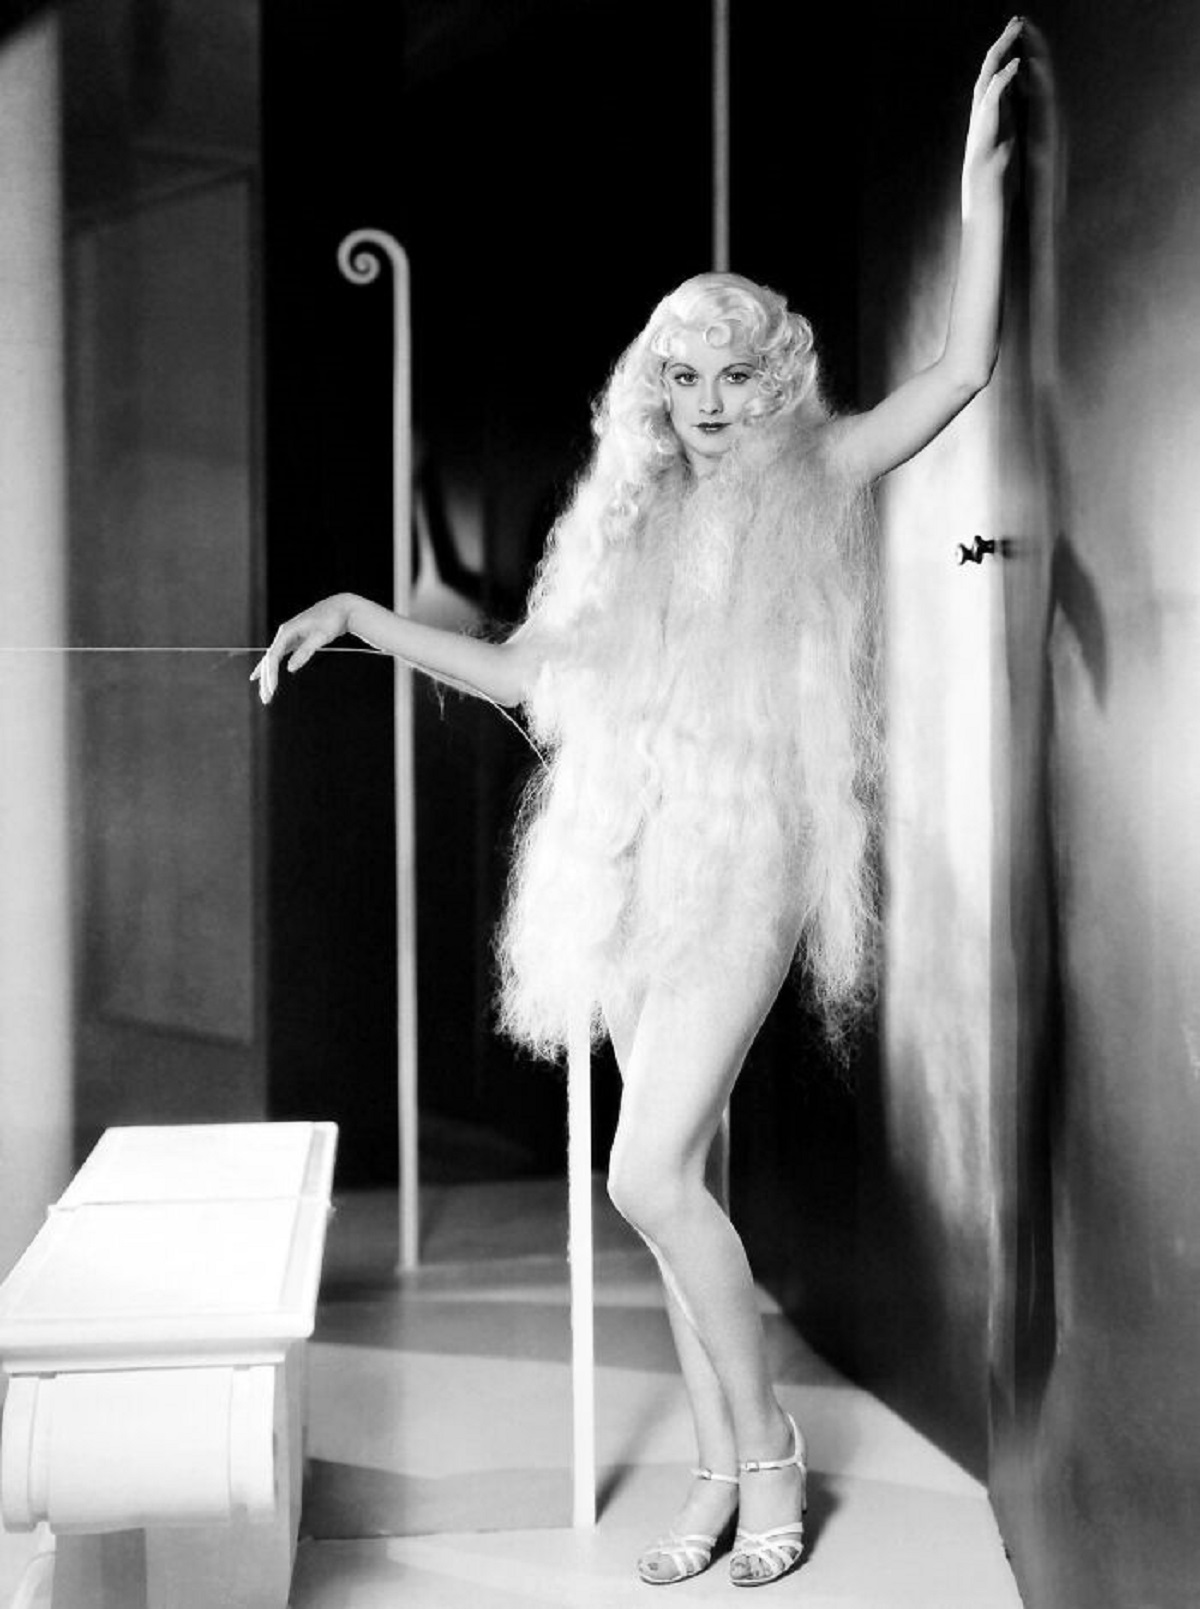 Lucille Ball, Once Called The Greatest Pair Of Legs On Broadway, In A 1930s Publicity Still As A Blonde